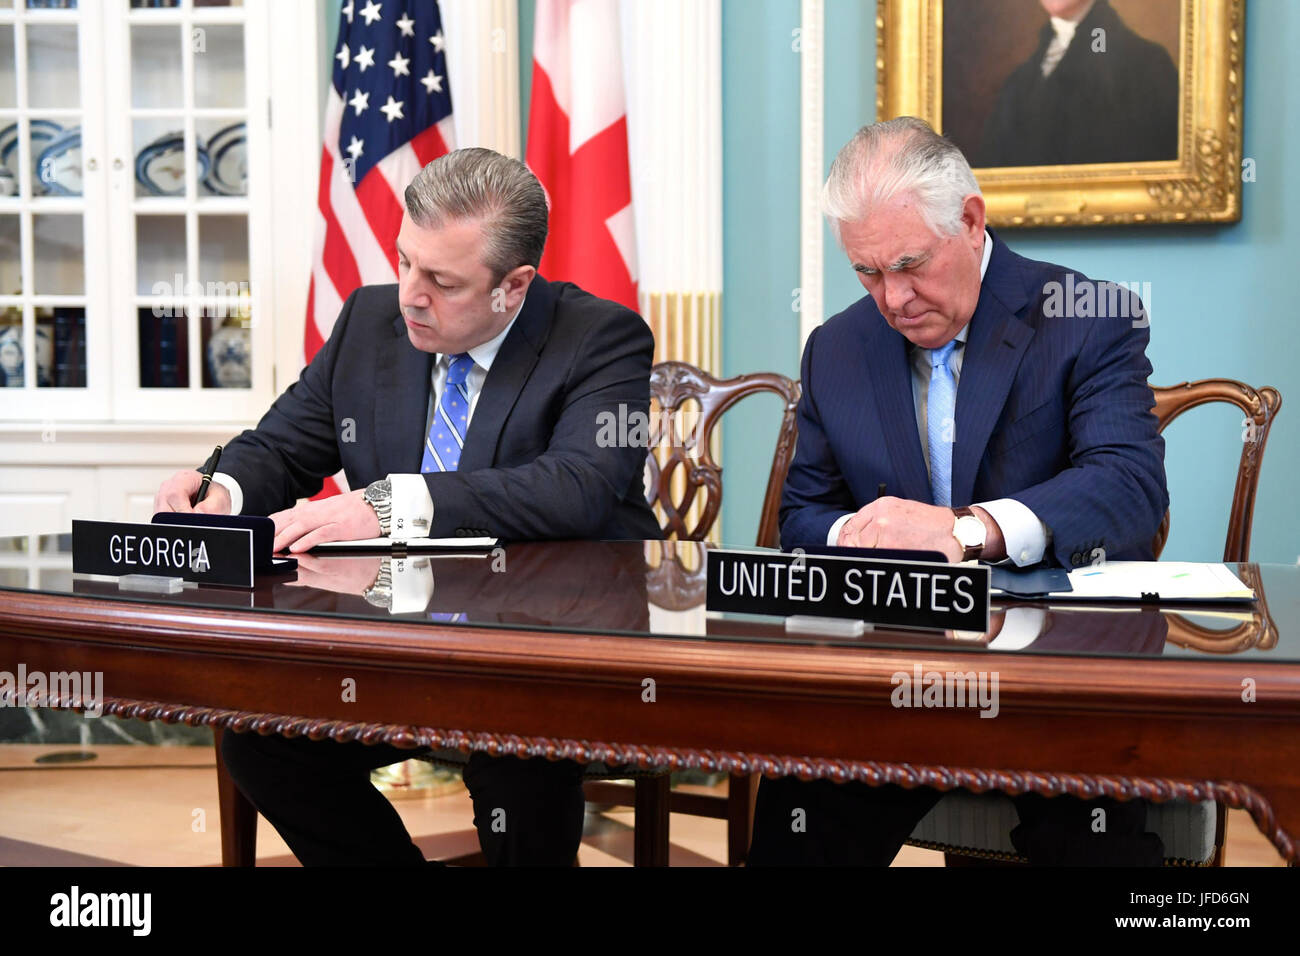 U.S. Secretary of State Rex Tillerson and Georgian Prime Minister Giorgi Kvirikashvili participate in a signing ceremony for the U.S.-Georgia General Security of Information Agreement, at the U.S. Department of State in Washington, D.C., on May 9, 2017. Stock Photo